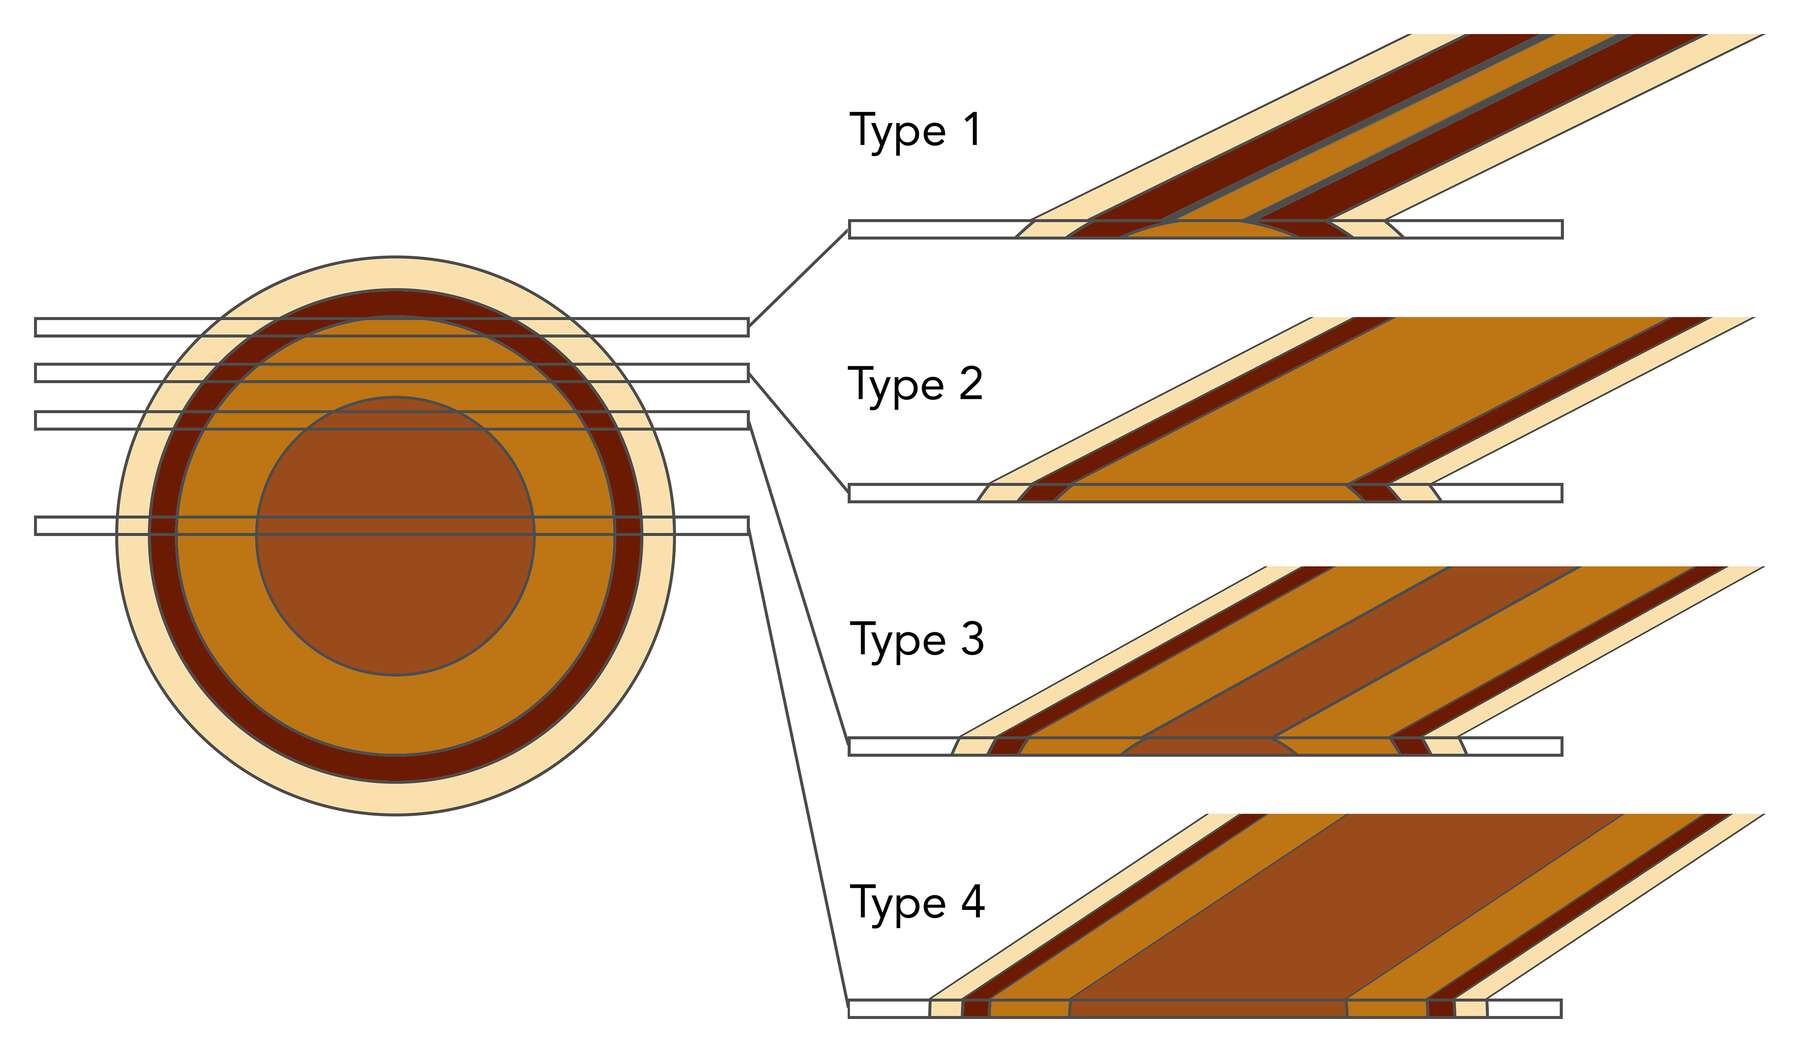 diagram of a log of ferréol revealing concentric rings of beige, dark brown, tan, and reddish layers of wood alongside four examples of the possible color variations in single slices of the log